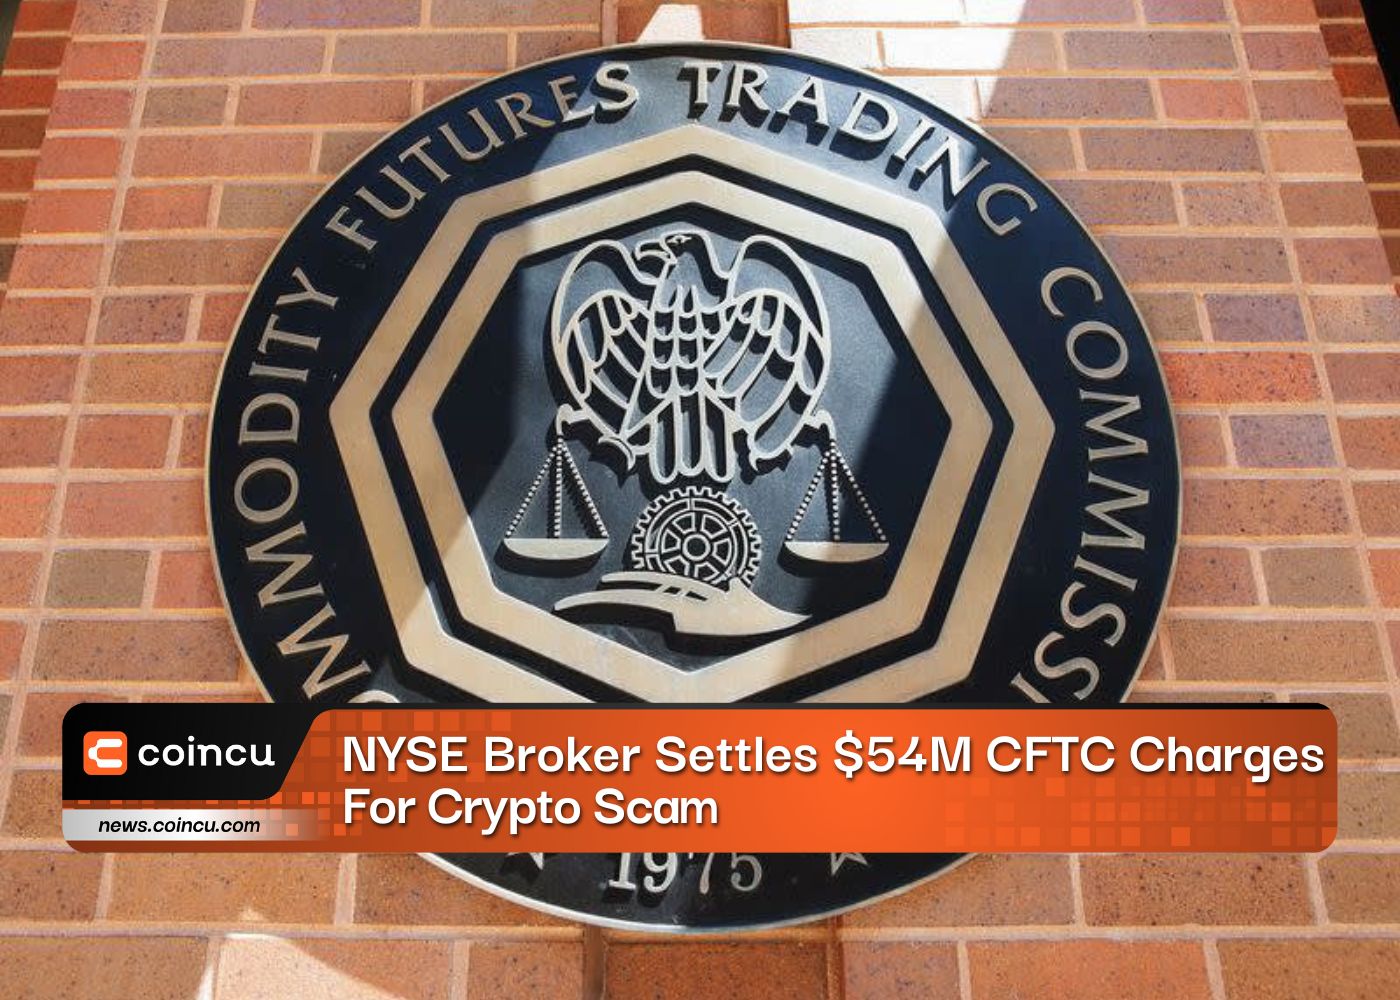 NYSE Broker Settles 54M CFTC Charges